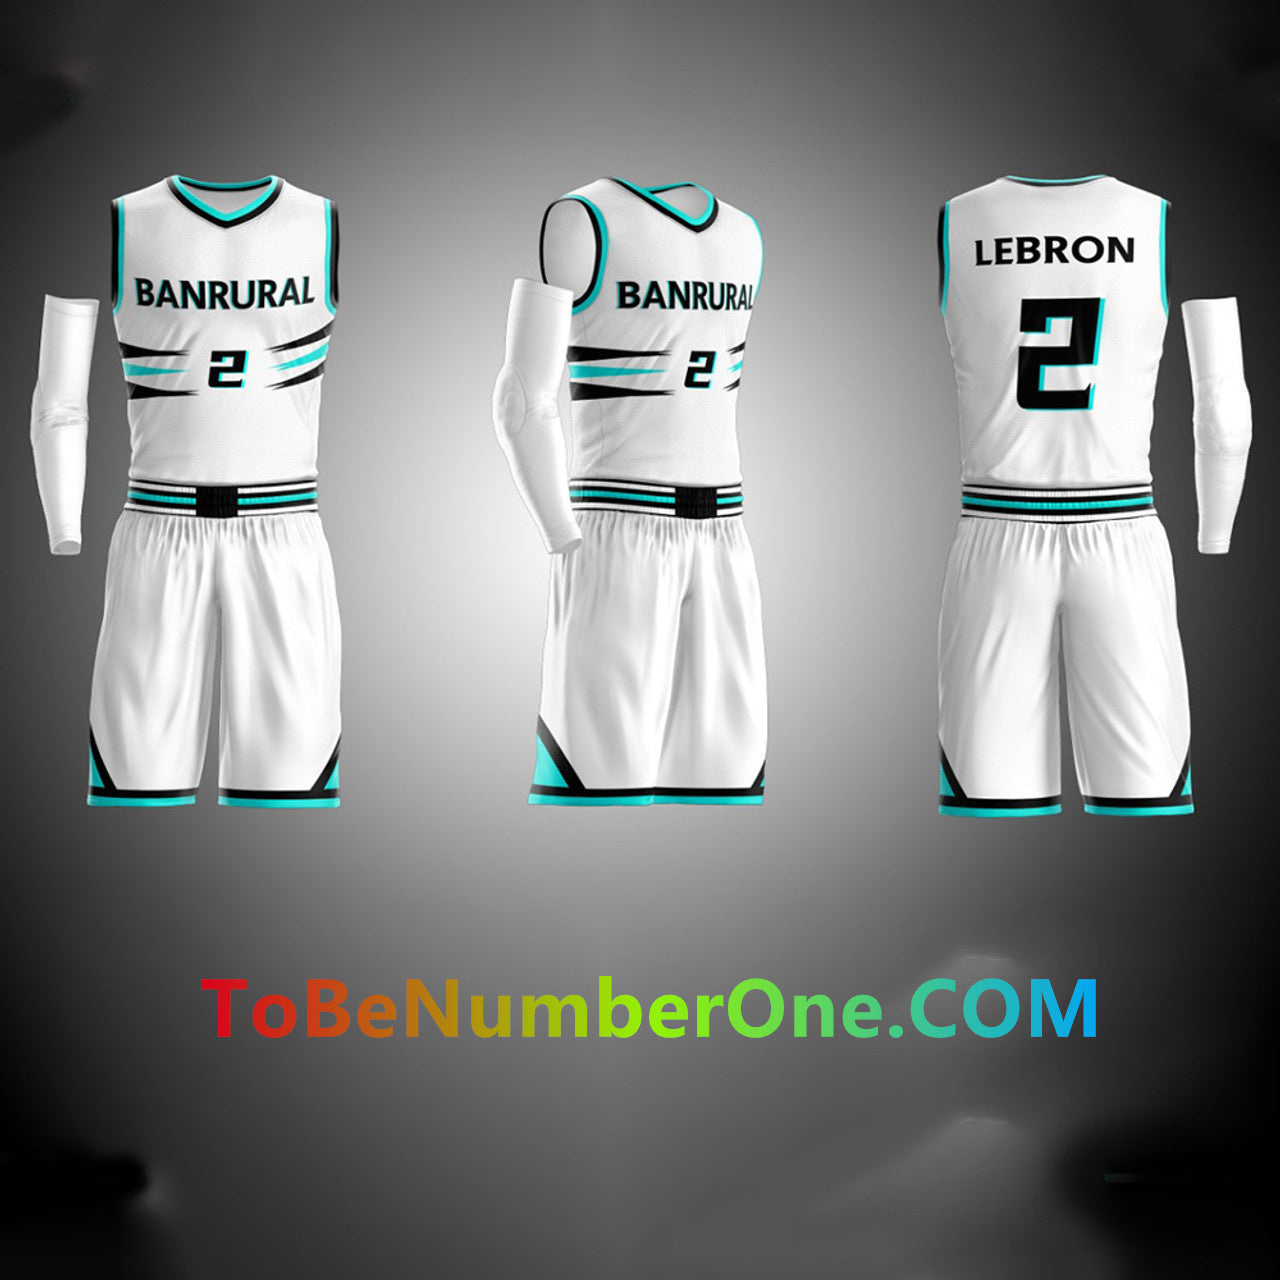 Custom Full Sublimated Basketball Set Tops and shorts - Make Your OWN Jersey - Personalized Team Uniforms B025